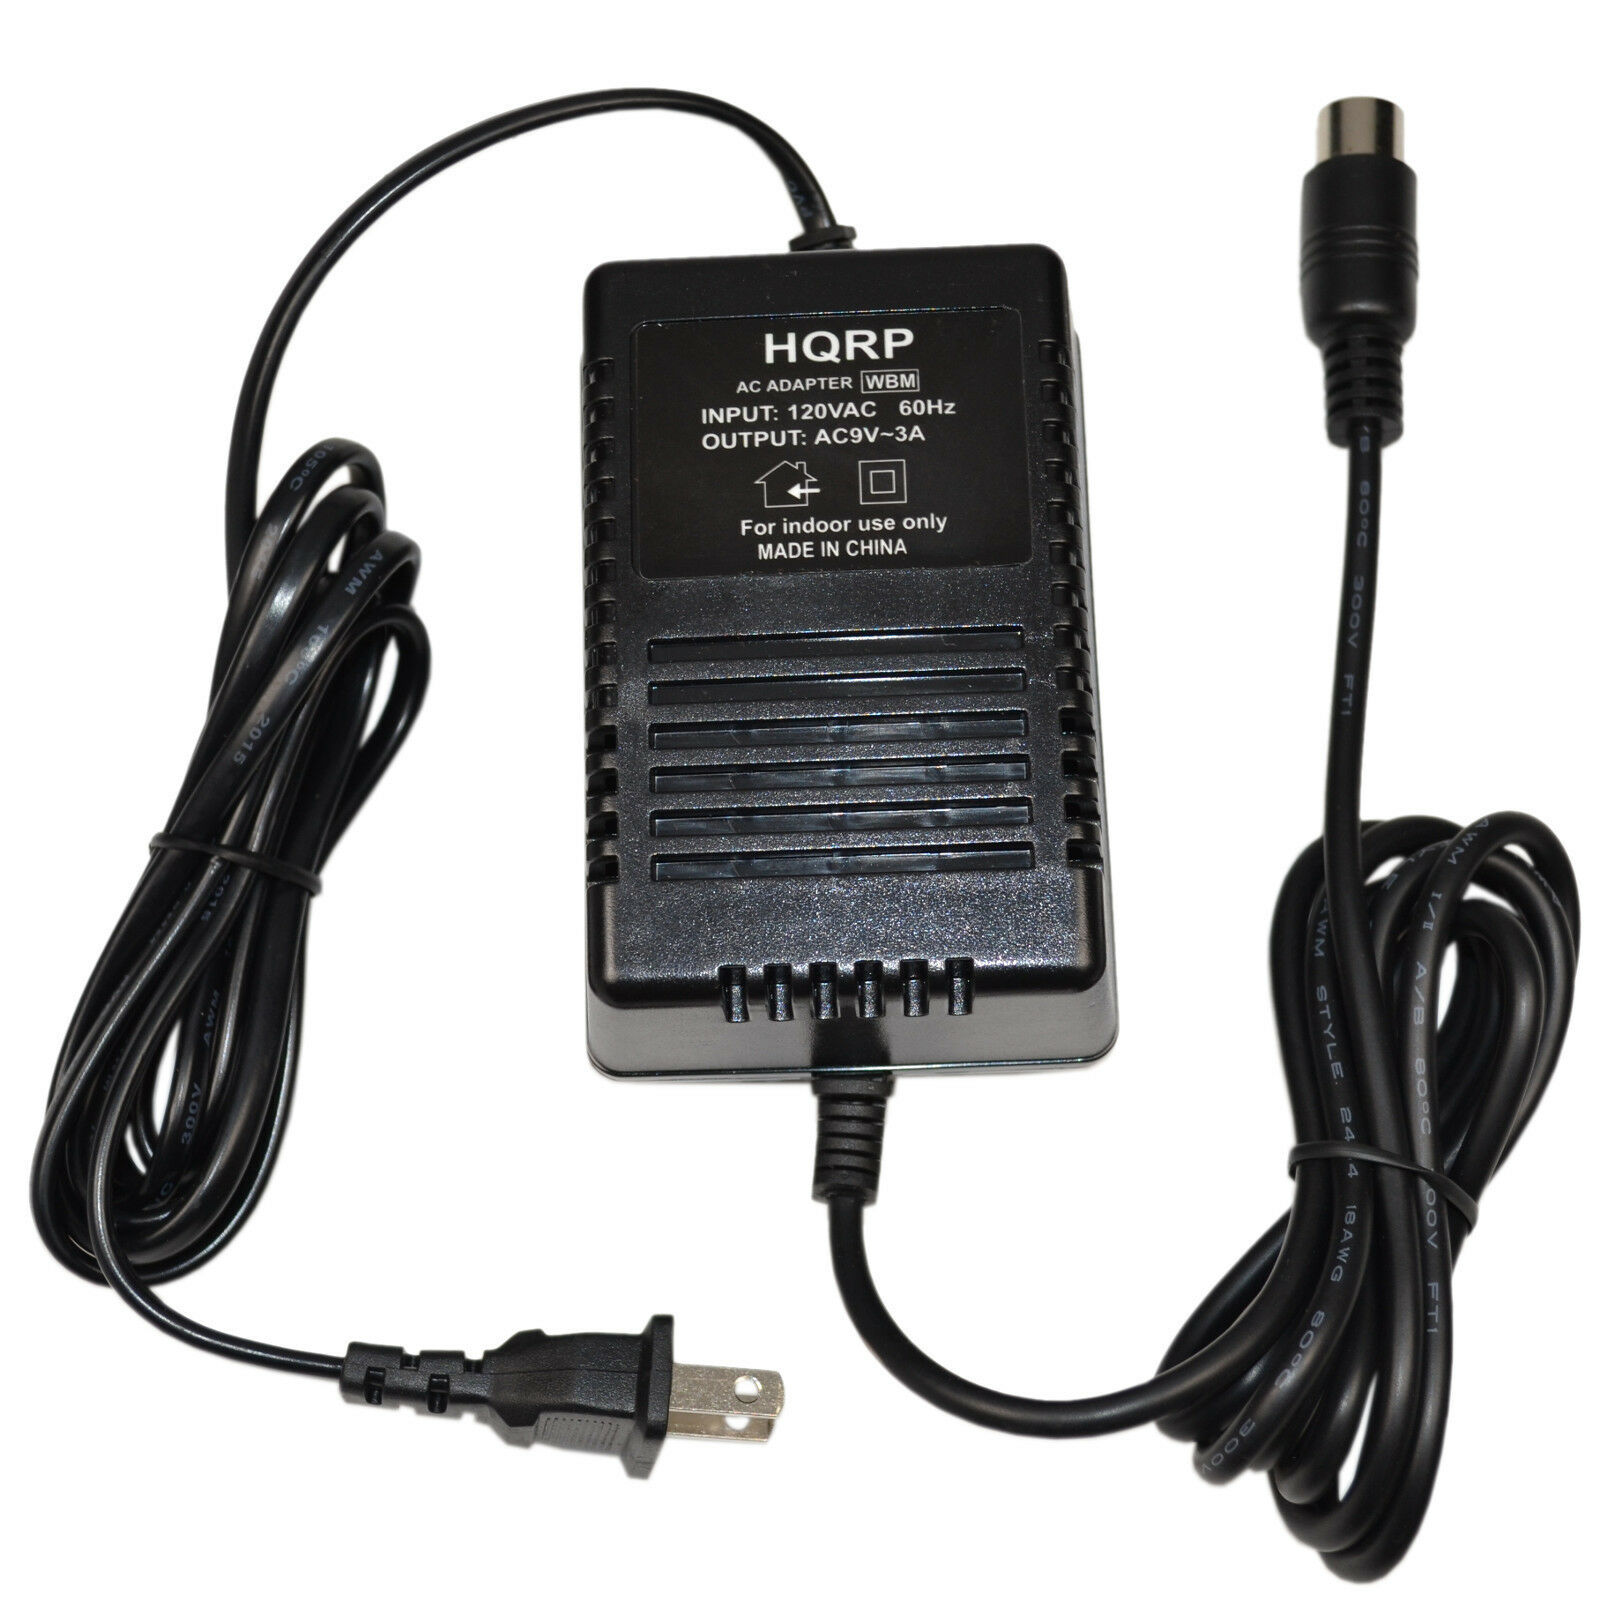 Power Supply AC Adapter for Korg Electribe MX EMX-1 KM2 N1 N1R N5 TR88 SP500 Compatible Brand: For Korg Suited For: